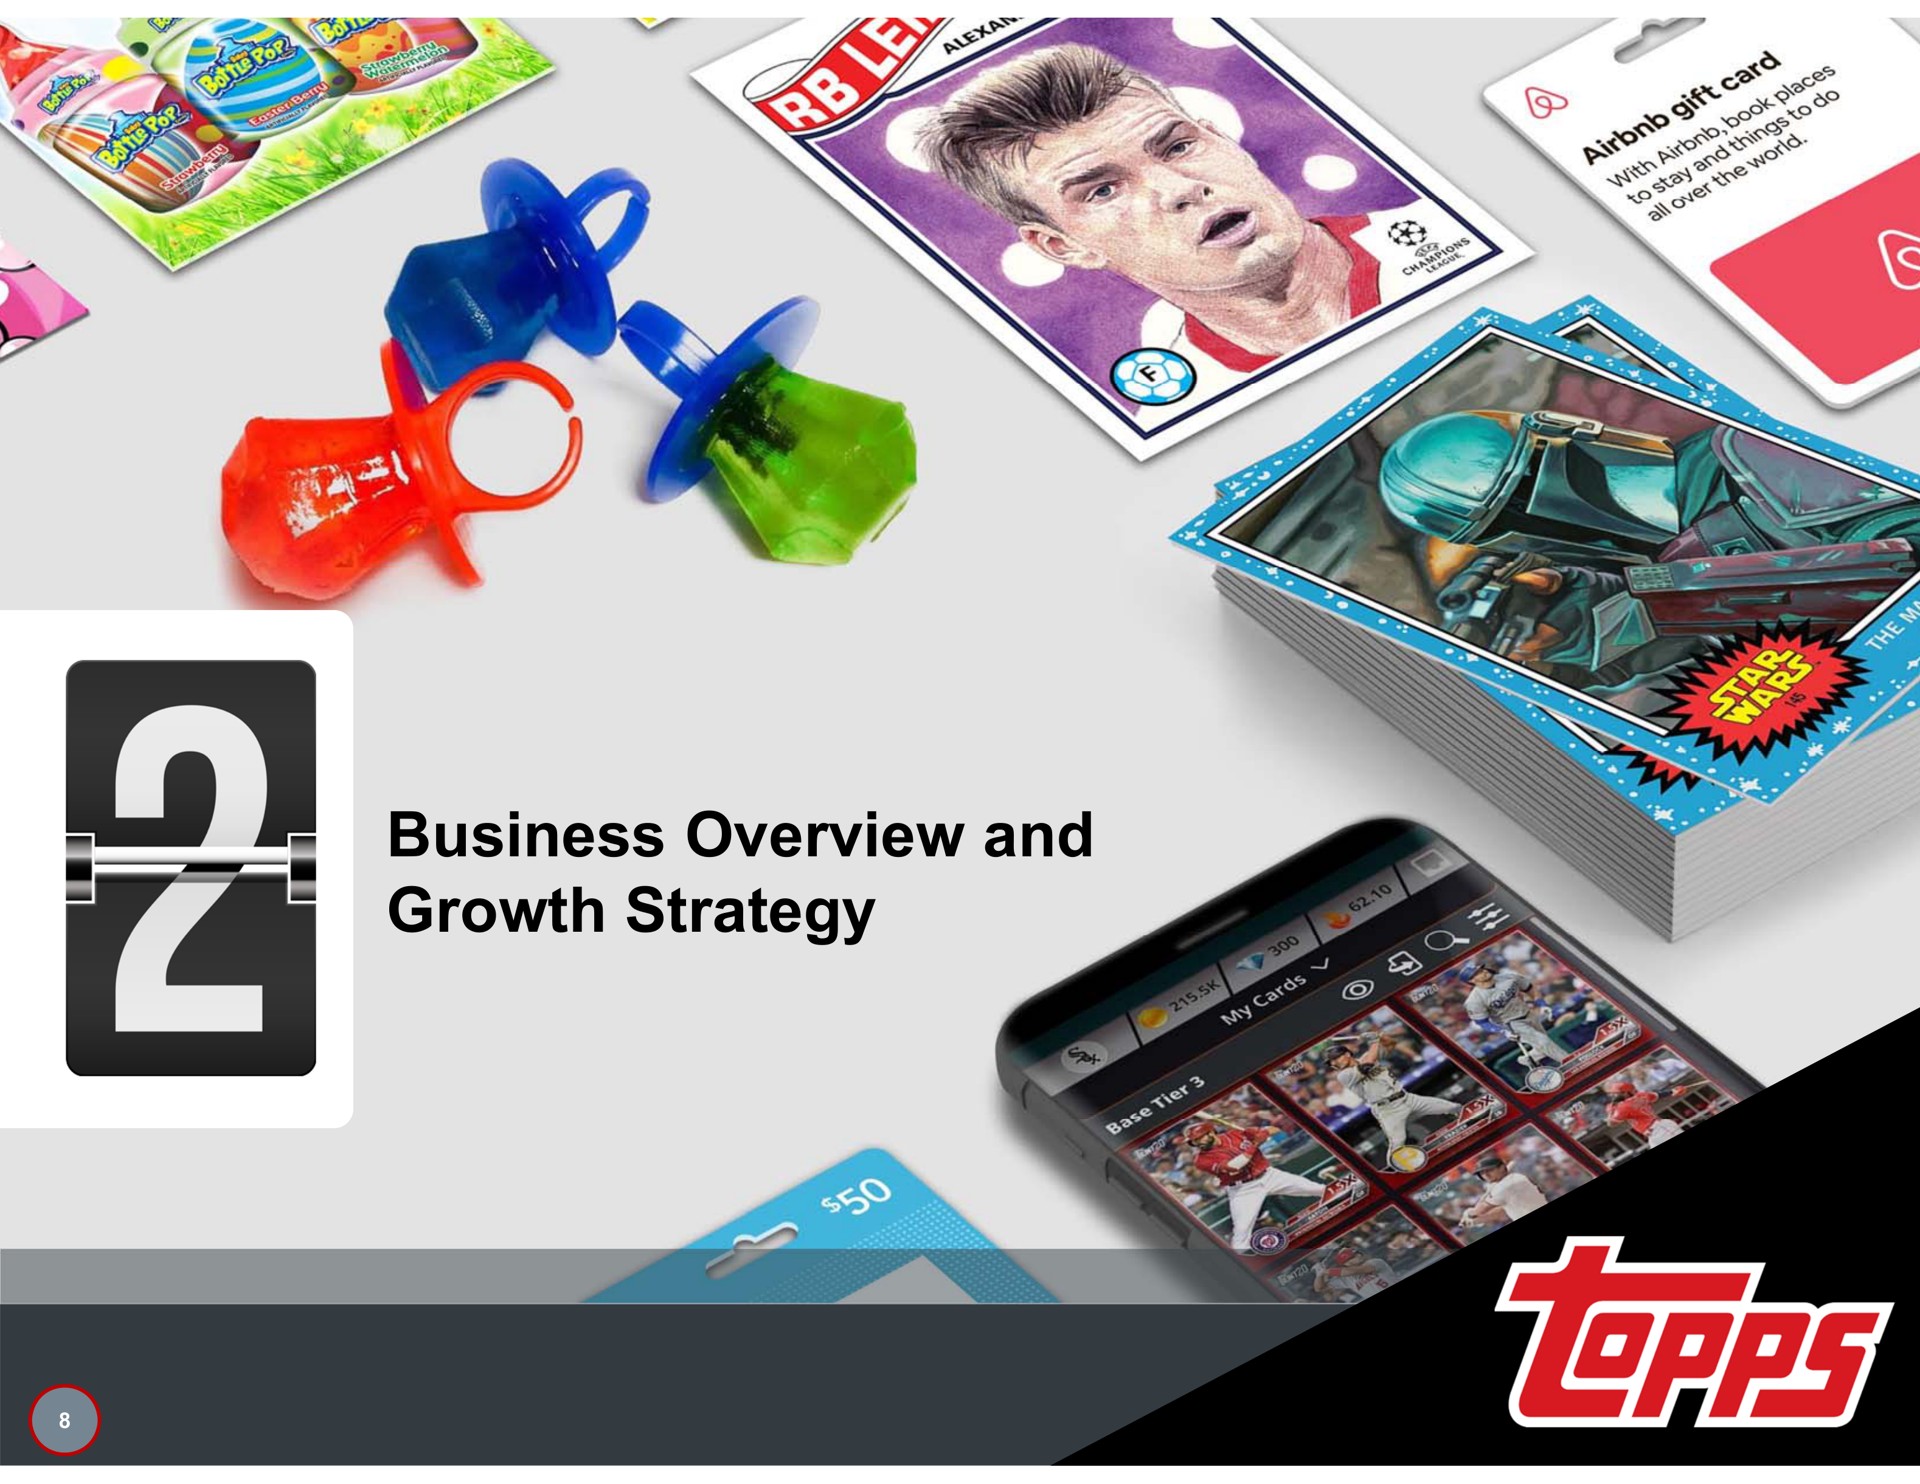 business overview and growth strategy | Topps